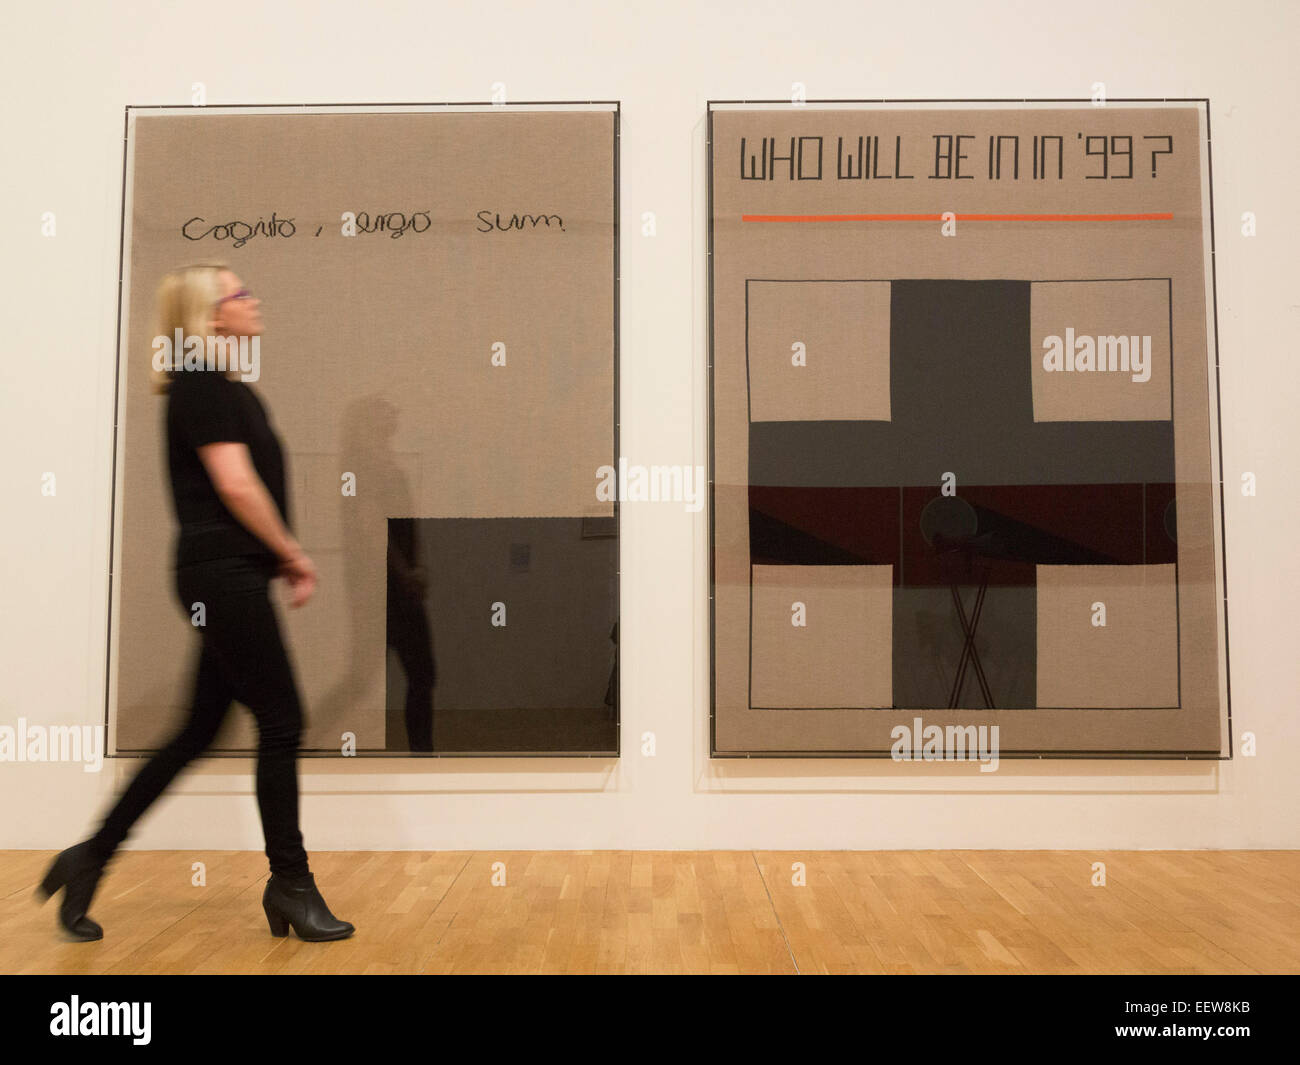 A Whitechapel employee looks at the Rosemarie Trockel artworks 'Cogito, ergo sum', 1999, and 'Who will be in in '99', 1988. The Whitechapel Gallery presents the exhibition Adventures of the Black Square, tracing a century of Abstract art from 1915 to today. Stock Photo